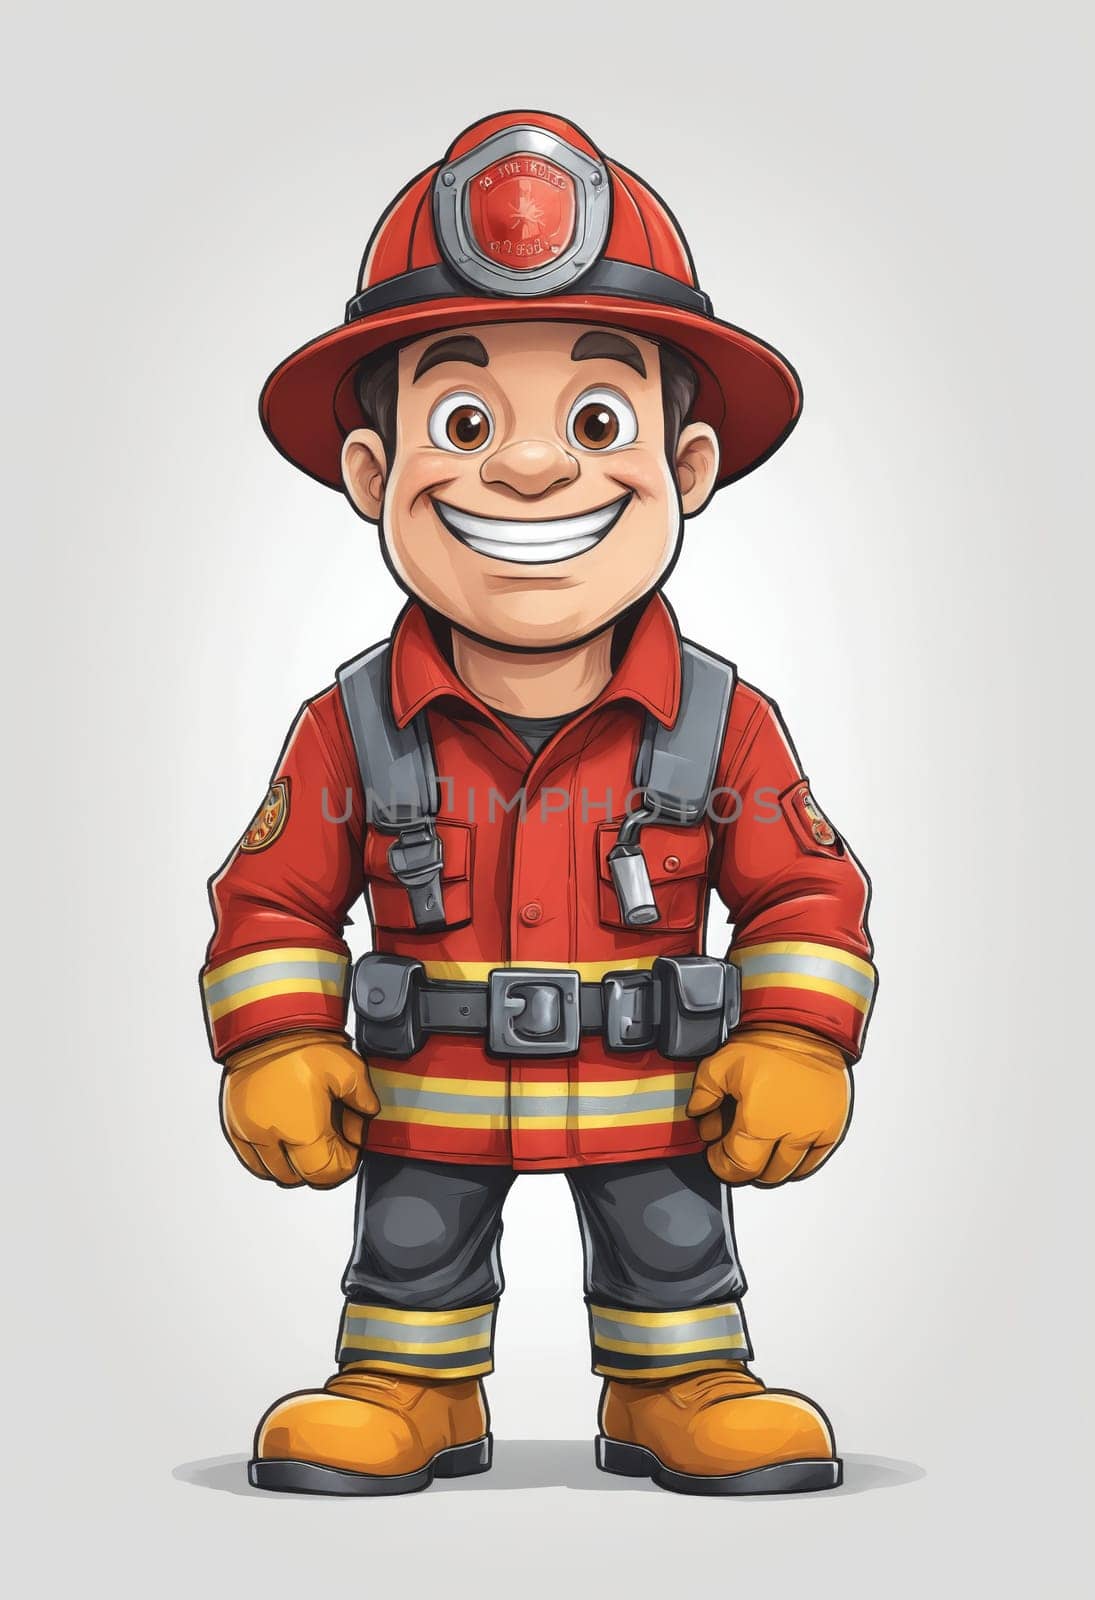 Emergency Bravery: Firefighter with Helmet, Visor, and Reflective Suit by Andre1ns